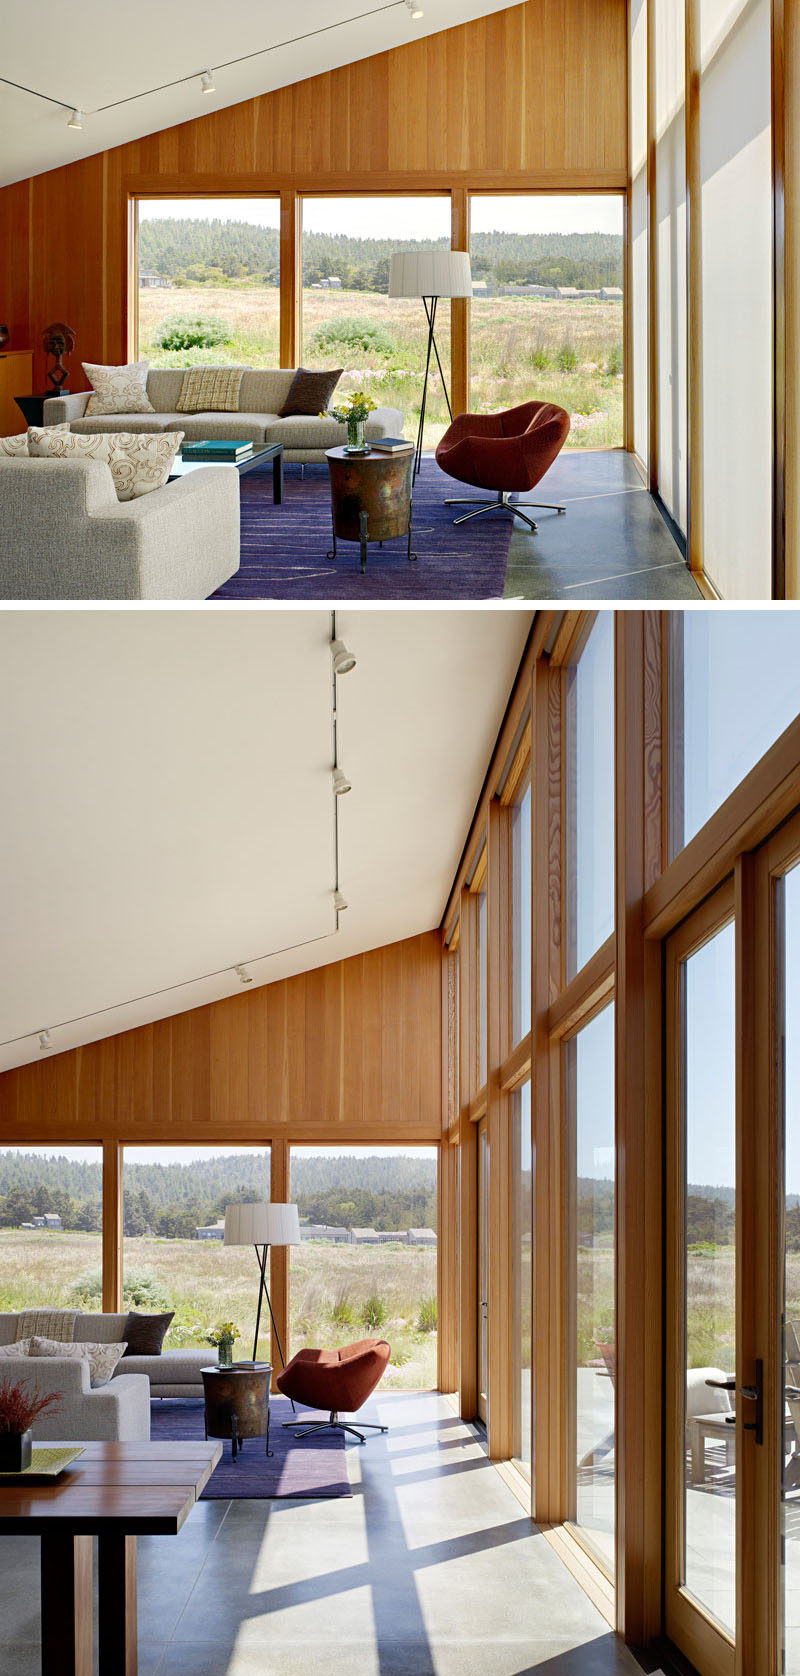 Large wood framed windows frame the views and fill the space with natural light.